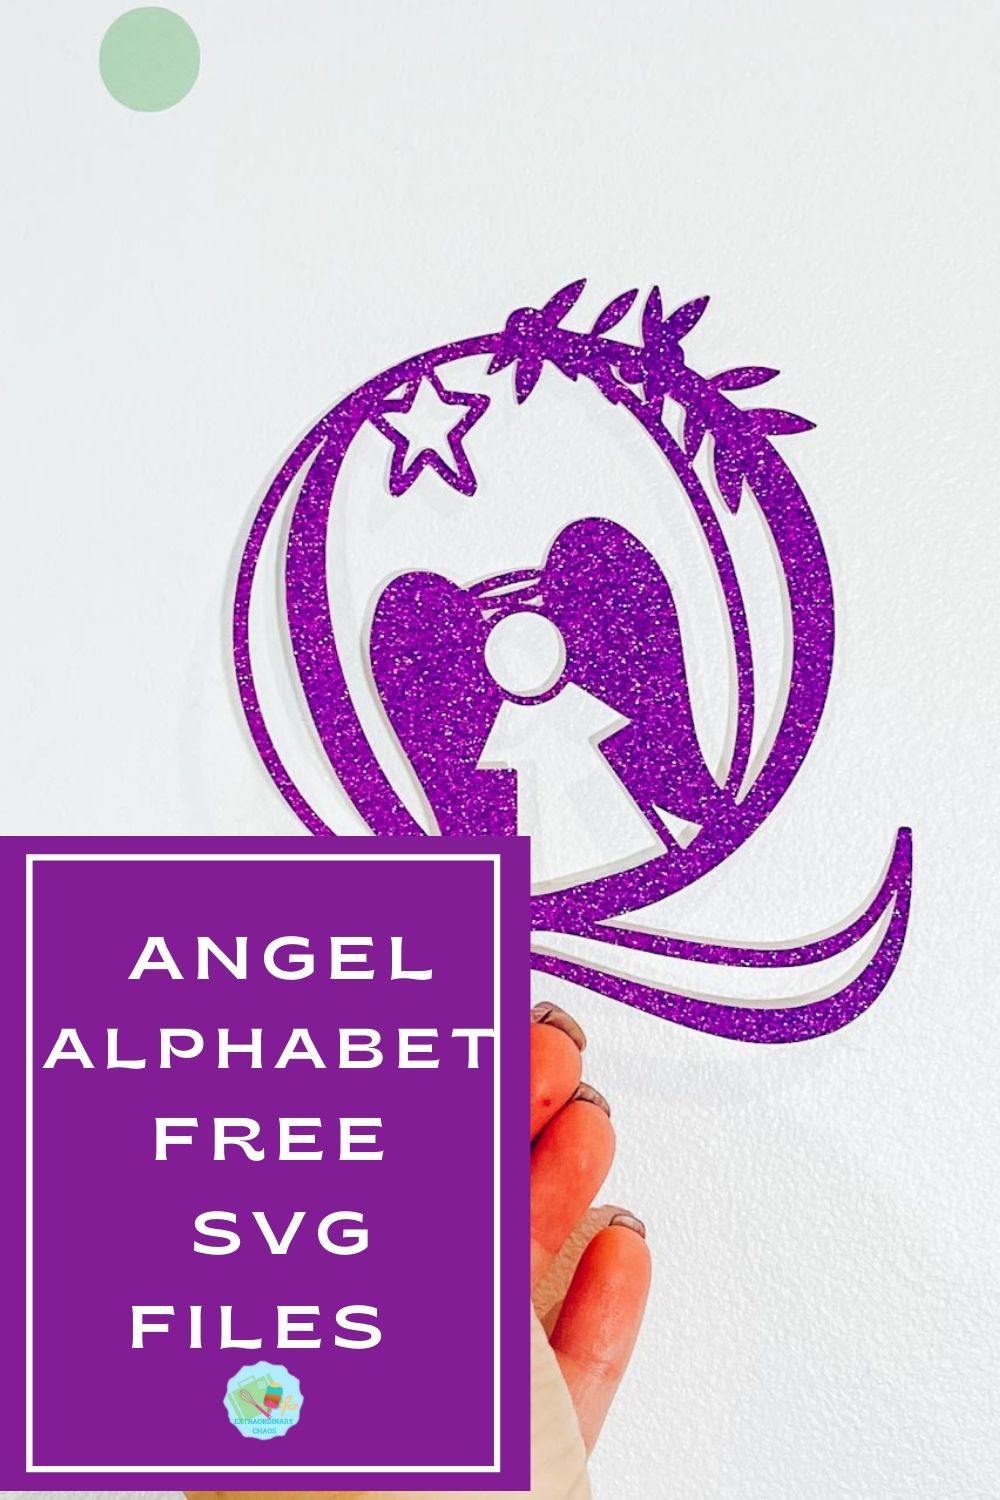 Angel Alphabet Free SVG, PNG files for Crafting with Cricut or Silhouette